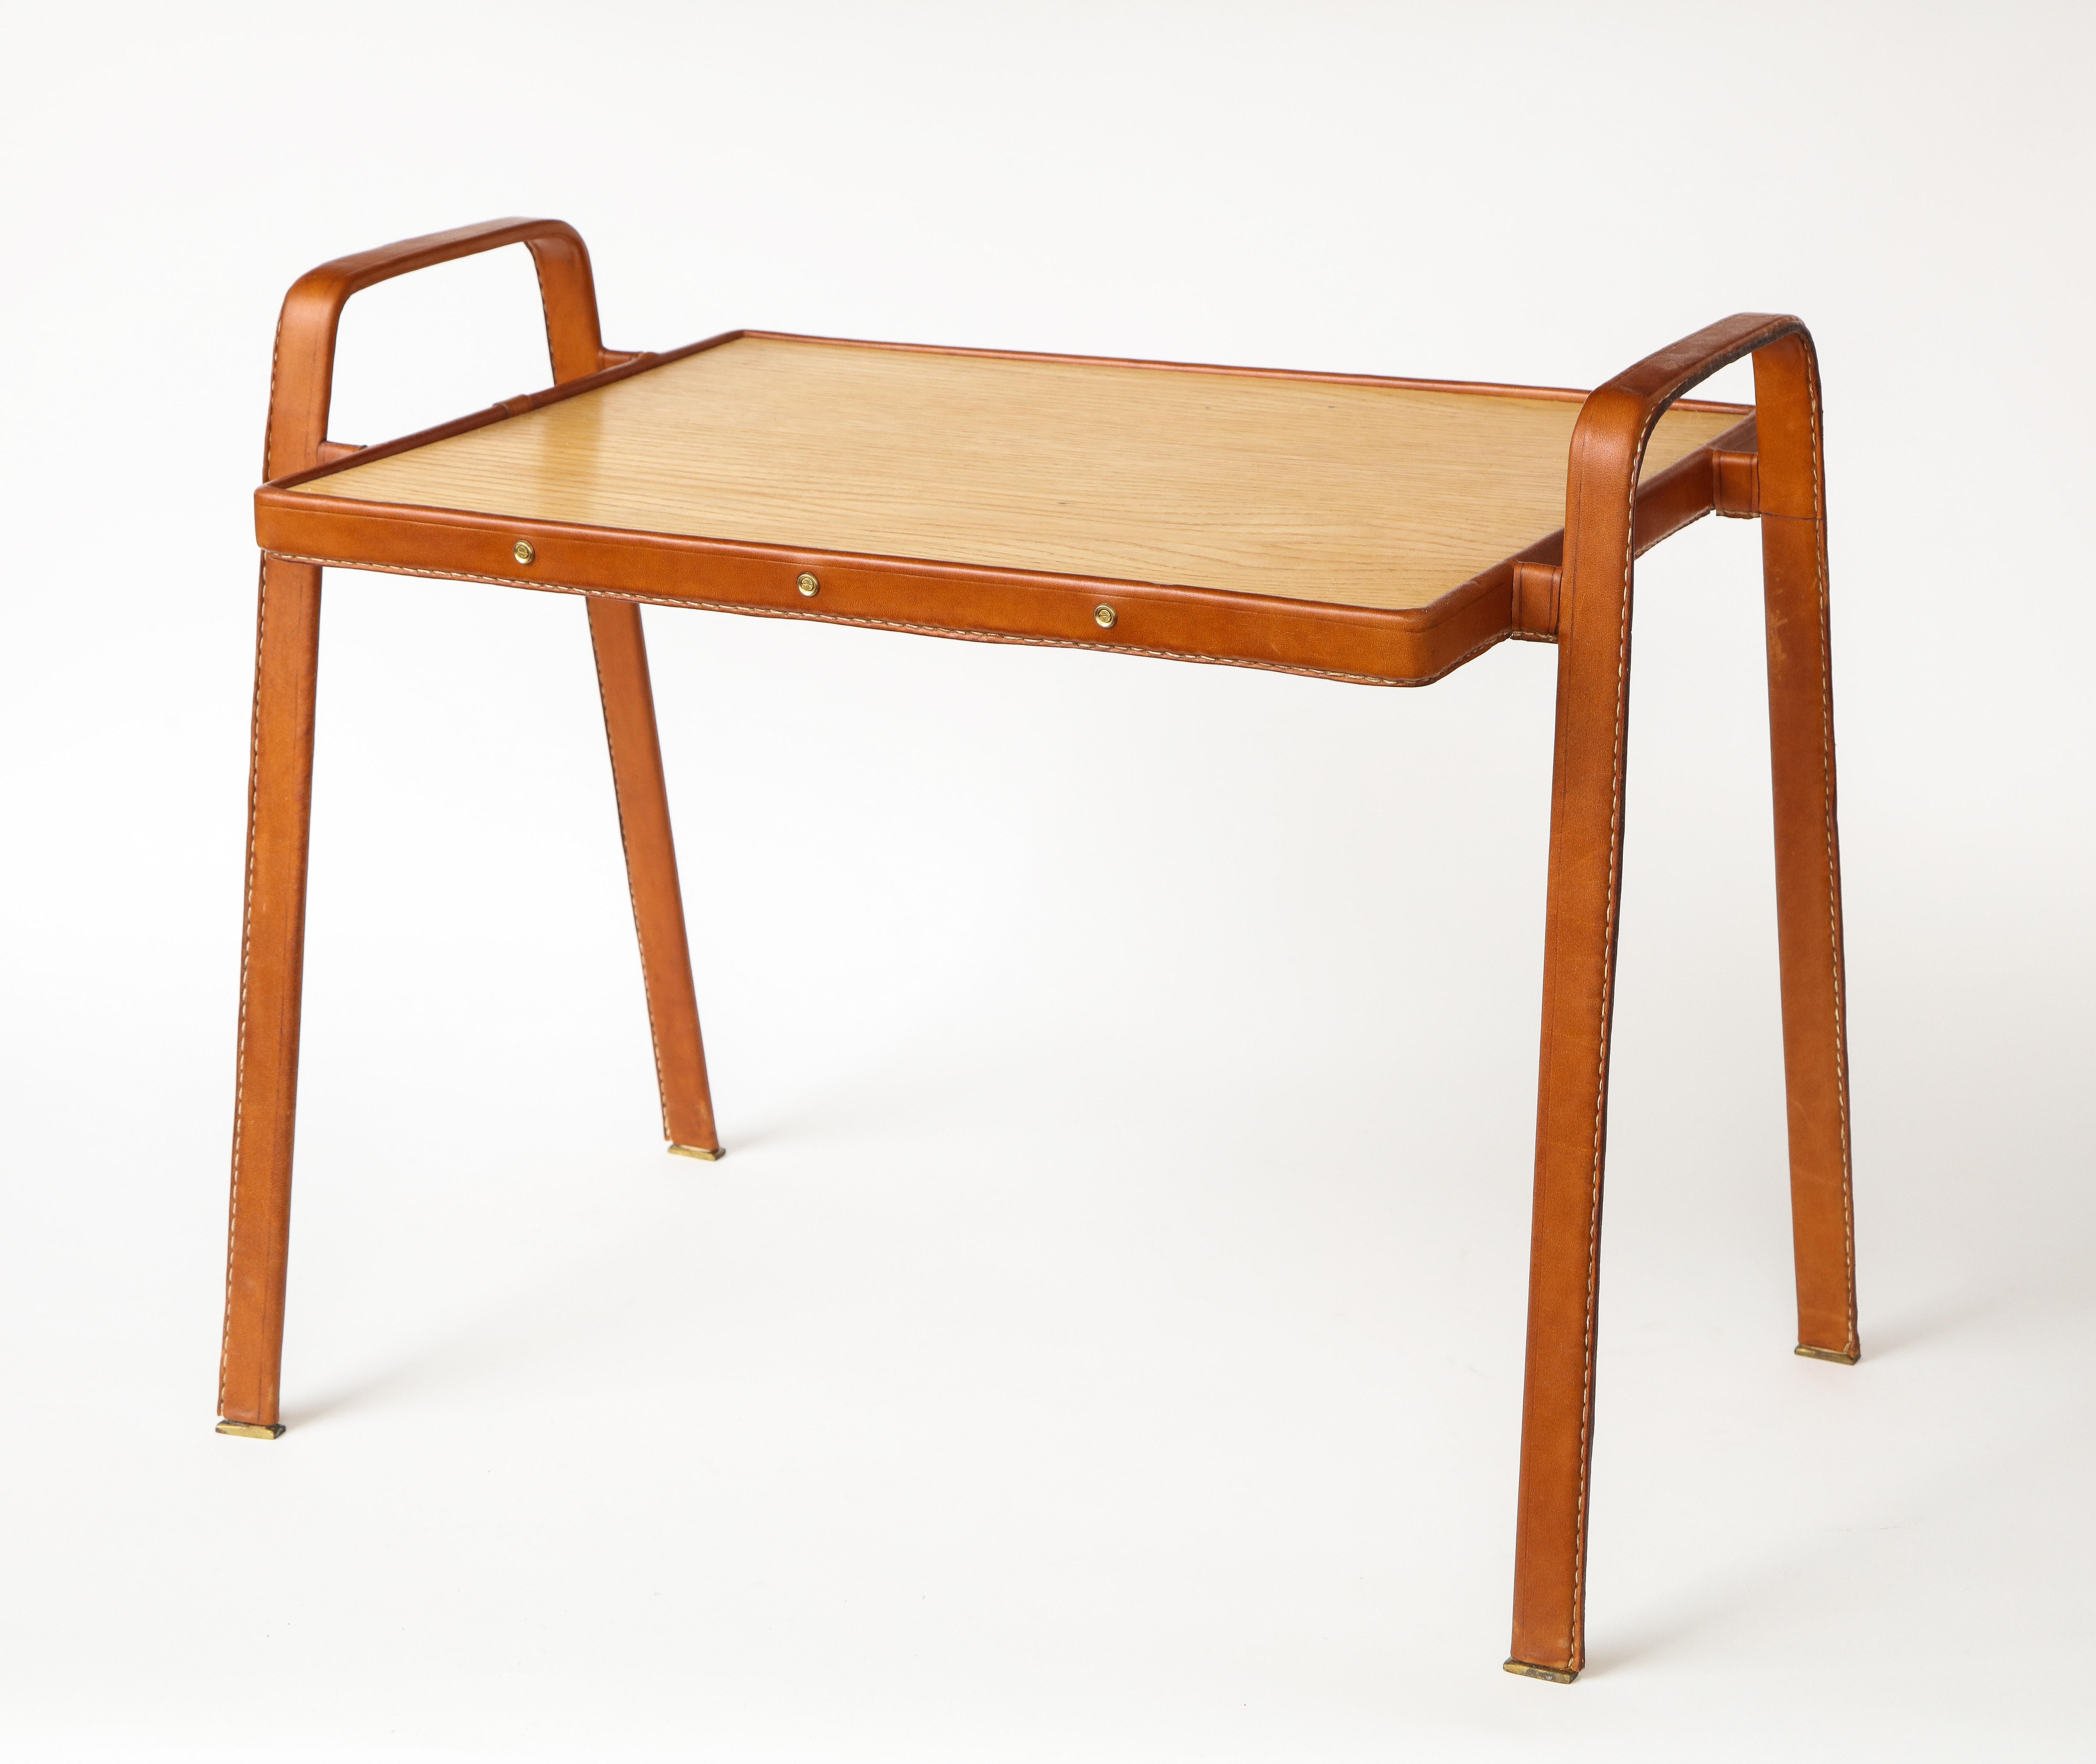 Modern Leather Stitched Side Table by Jacques Adnet, c. 1950 For Sale